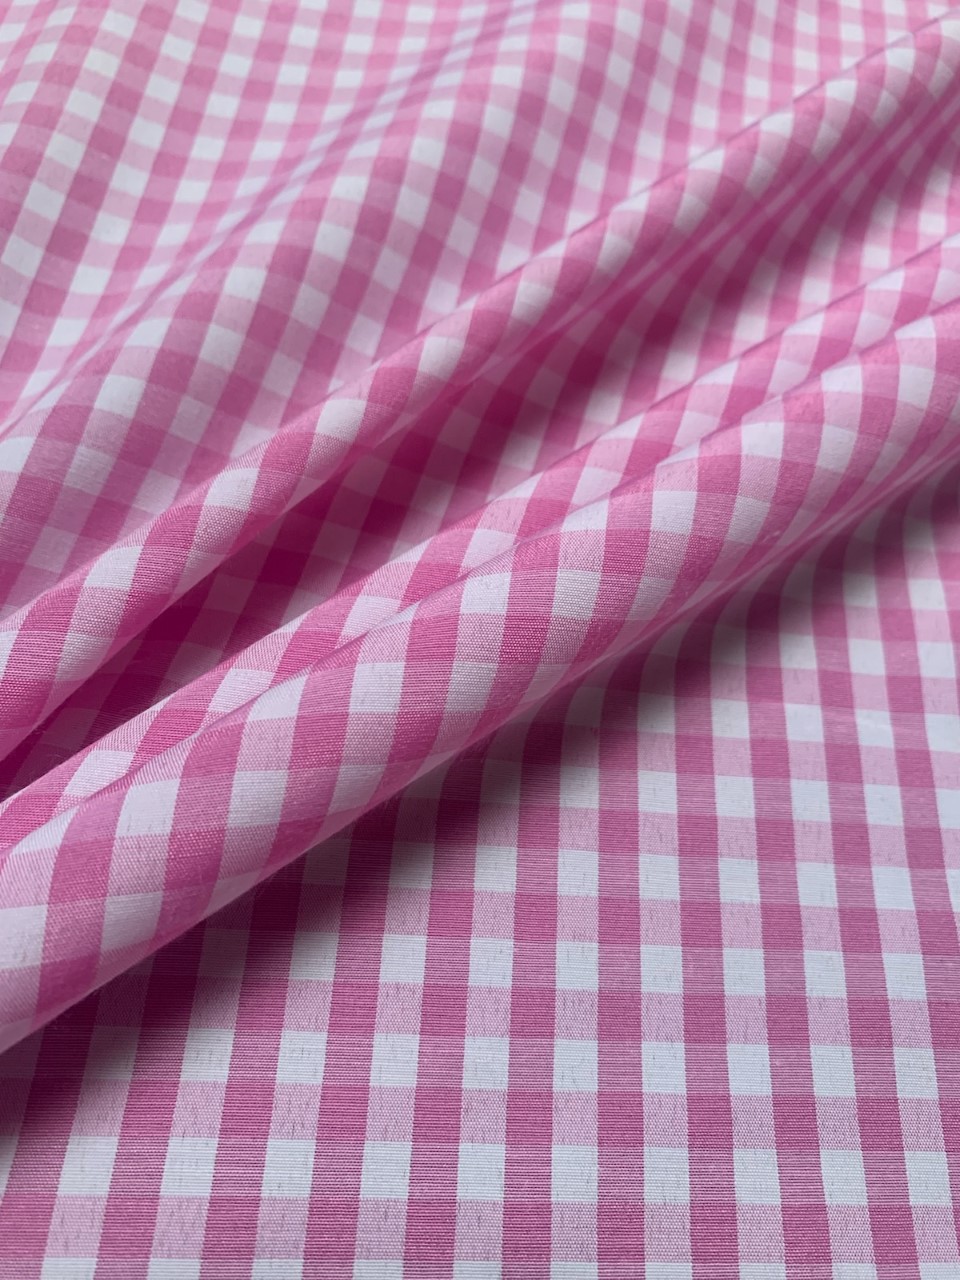 1/4" Pink Gingham Fabric 60" Wide By The Yard Poly Cotton Blend